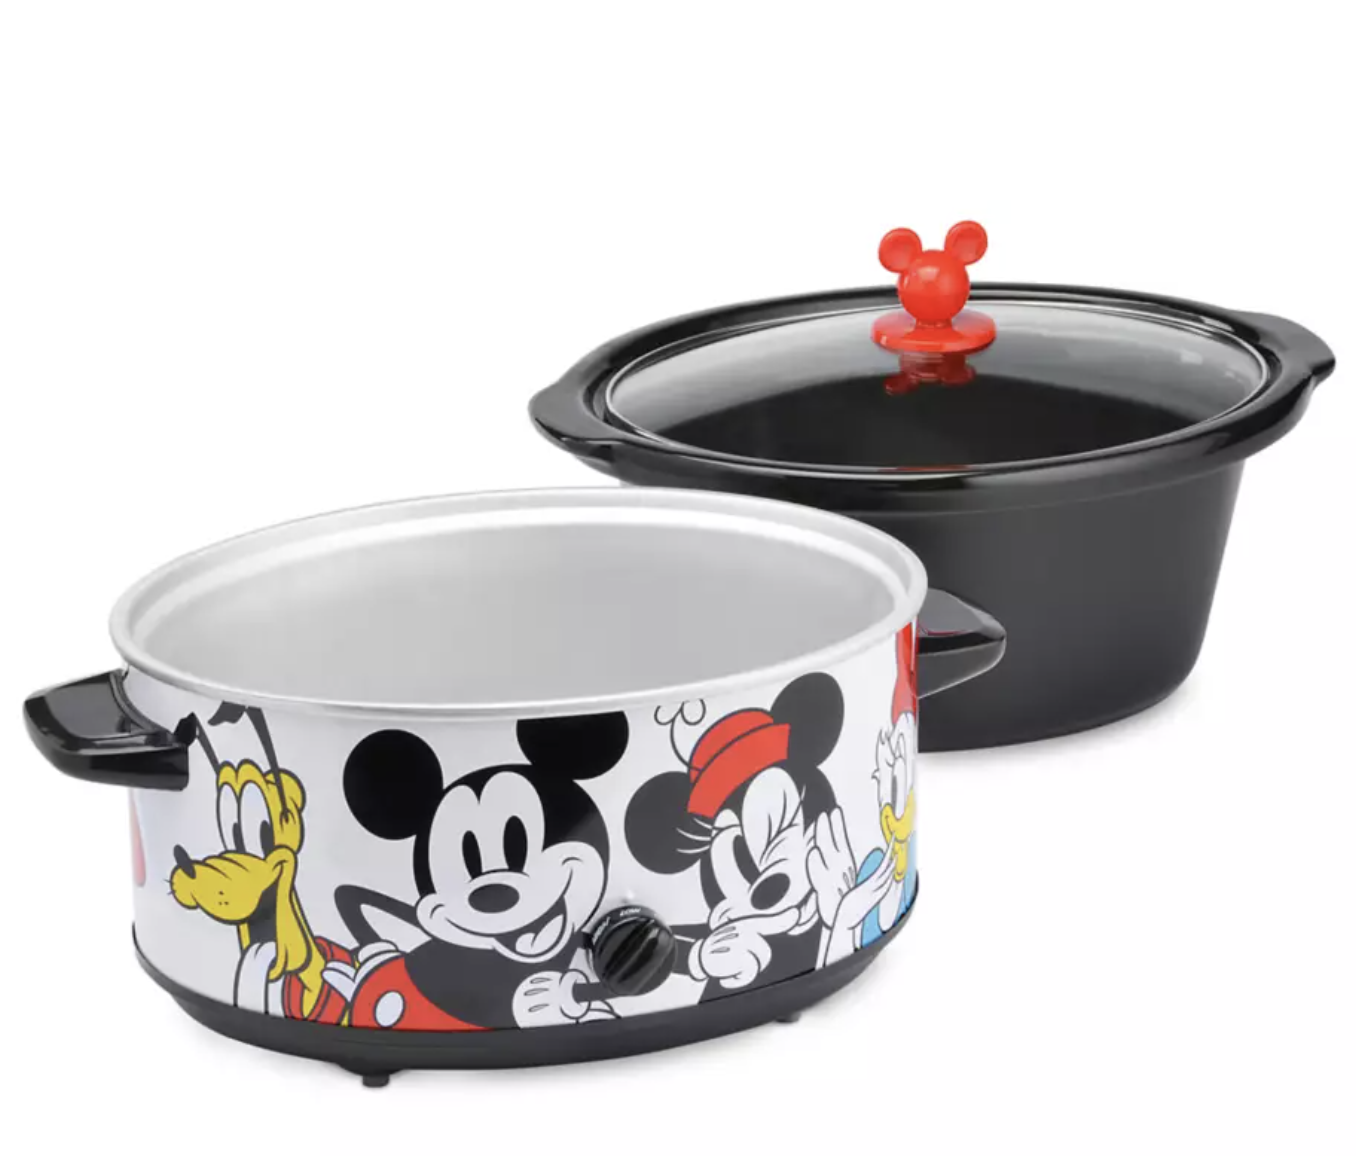 https://allears.net/wp-content/uploads/2022/11/fab-five-mickey-and-friends-slow-cooker-shopdisney.png